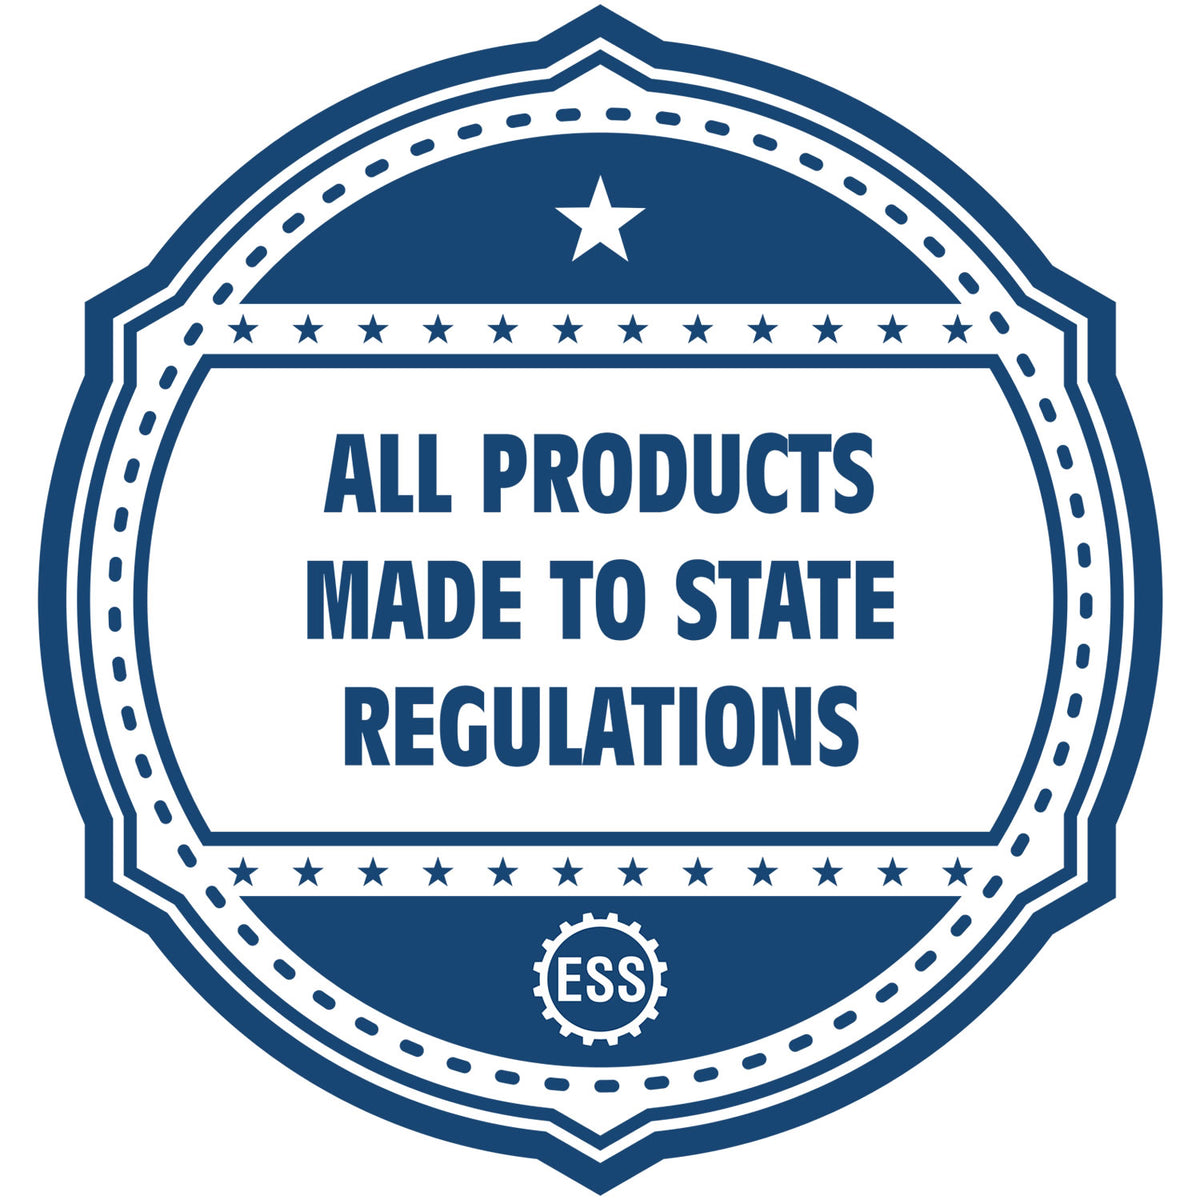 An icon or badge element for the Soft Indiana Professional Engineer Seal showing that this product is made in compliance with state regulations.